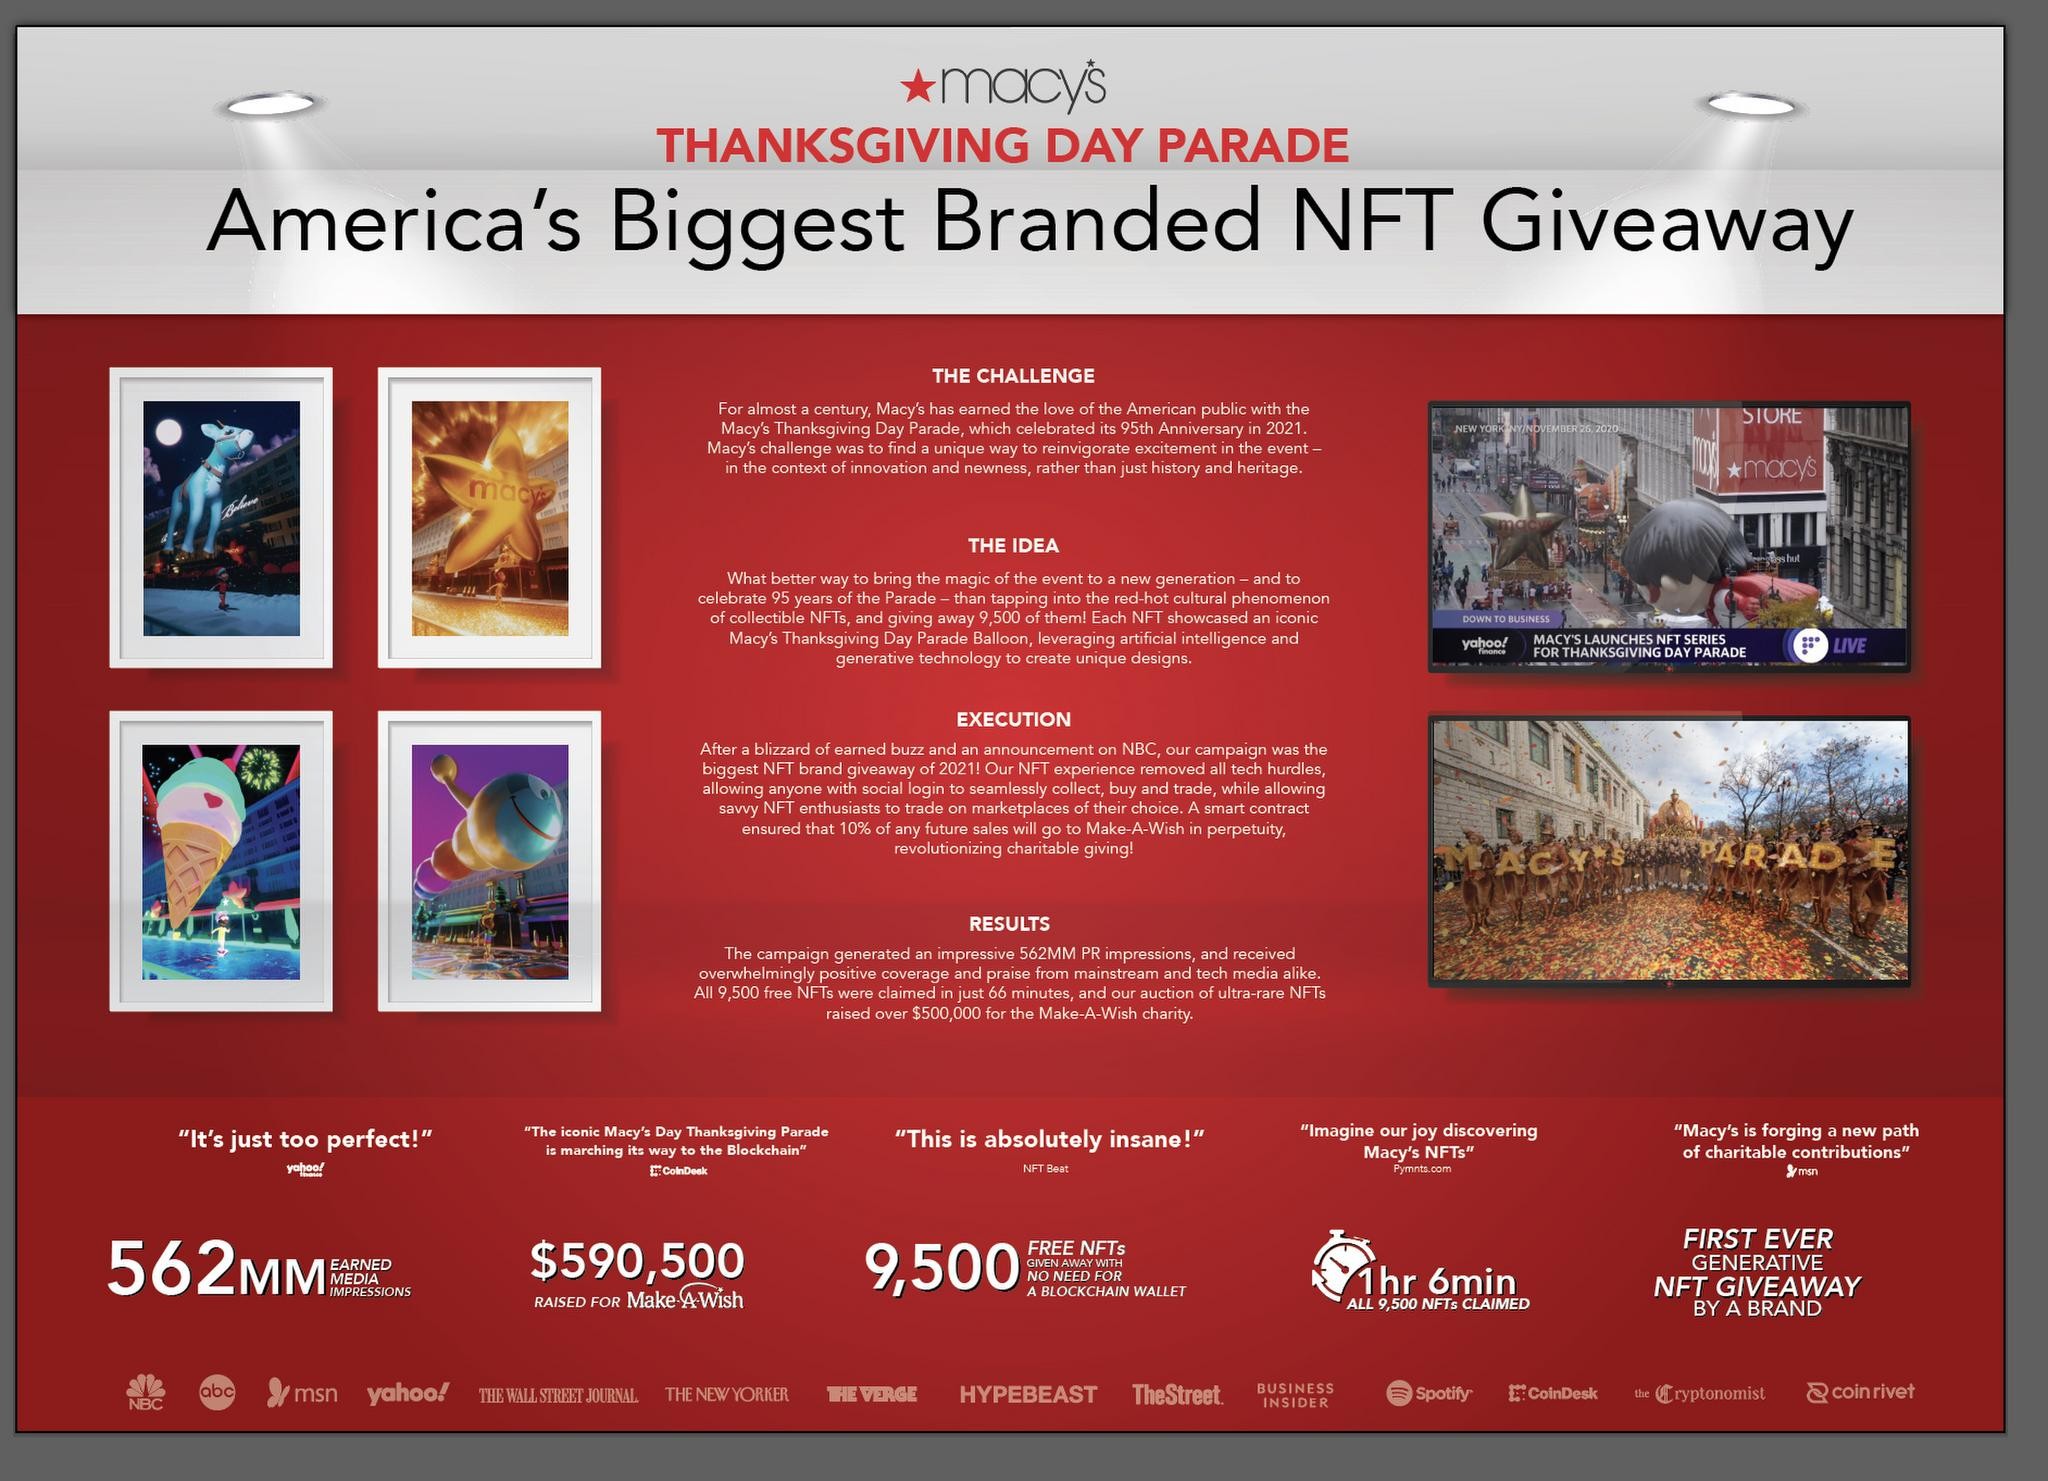 MACY’S THANKSGIVING PARADE – AMERICA’S BIGGEST BRANDED NFT GIVEAWAY!